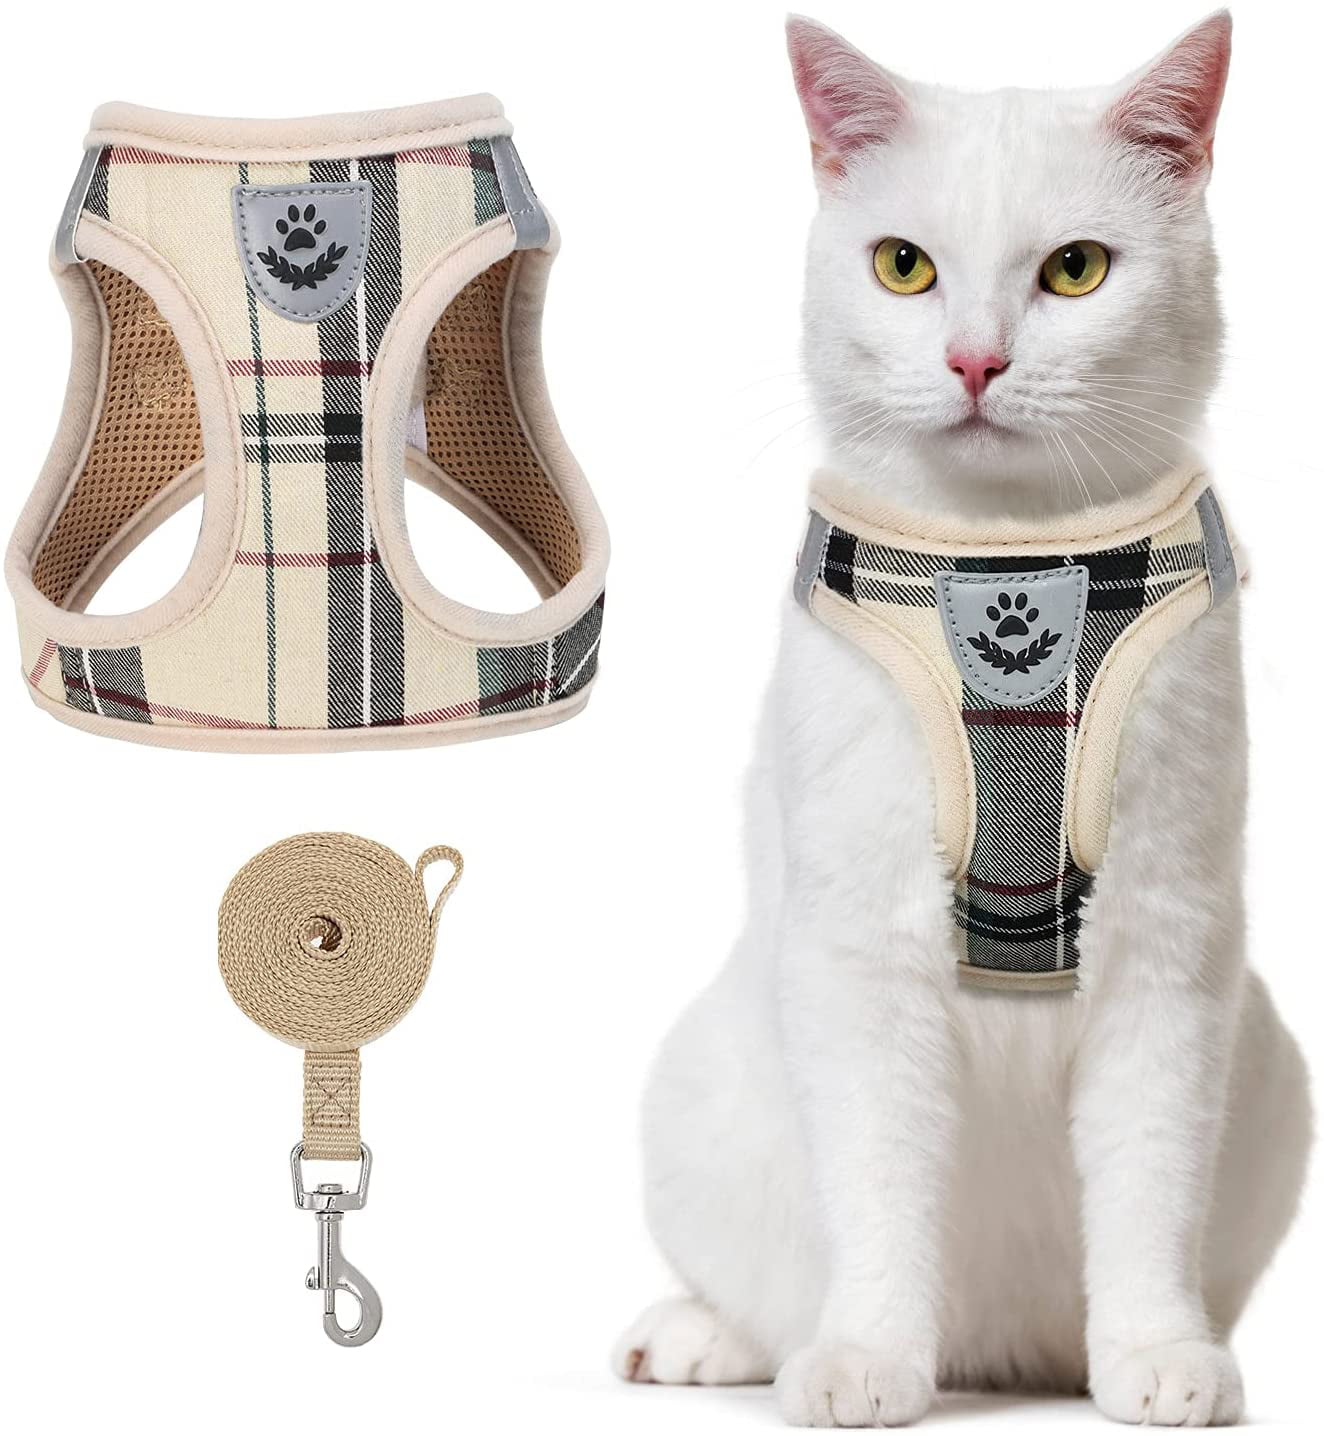 Escape Proof Cat Vest Harness Easy Control for Outdoor Walking PUPTECK Breathable Cat Harness and Leash Set Reflective Adjustable Soft Mesh Kitty Puppy Harness 